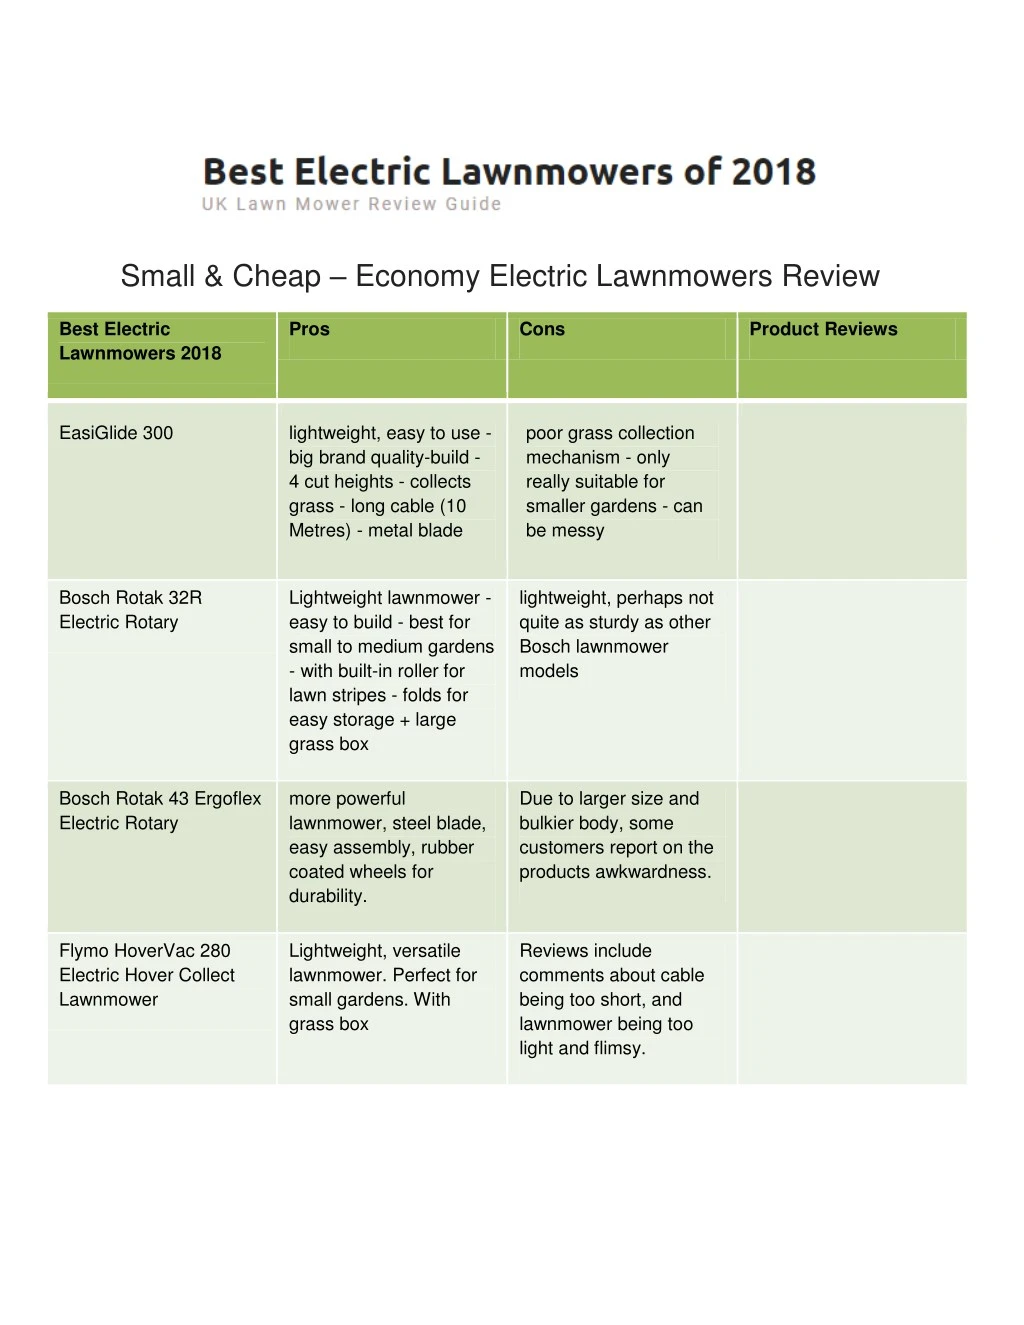 small cheap economy electric lawnmowers review